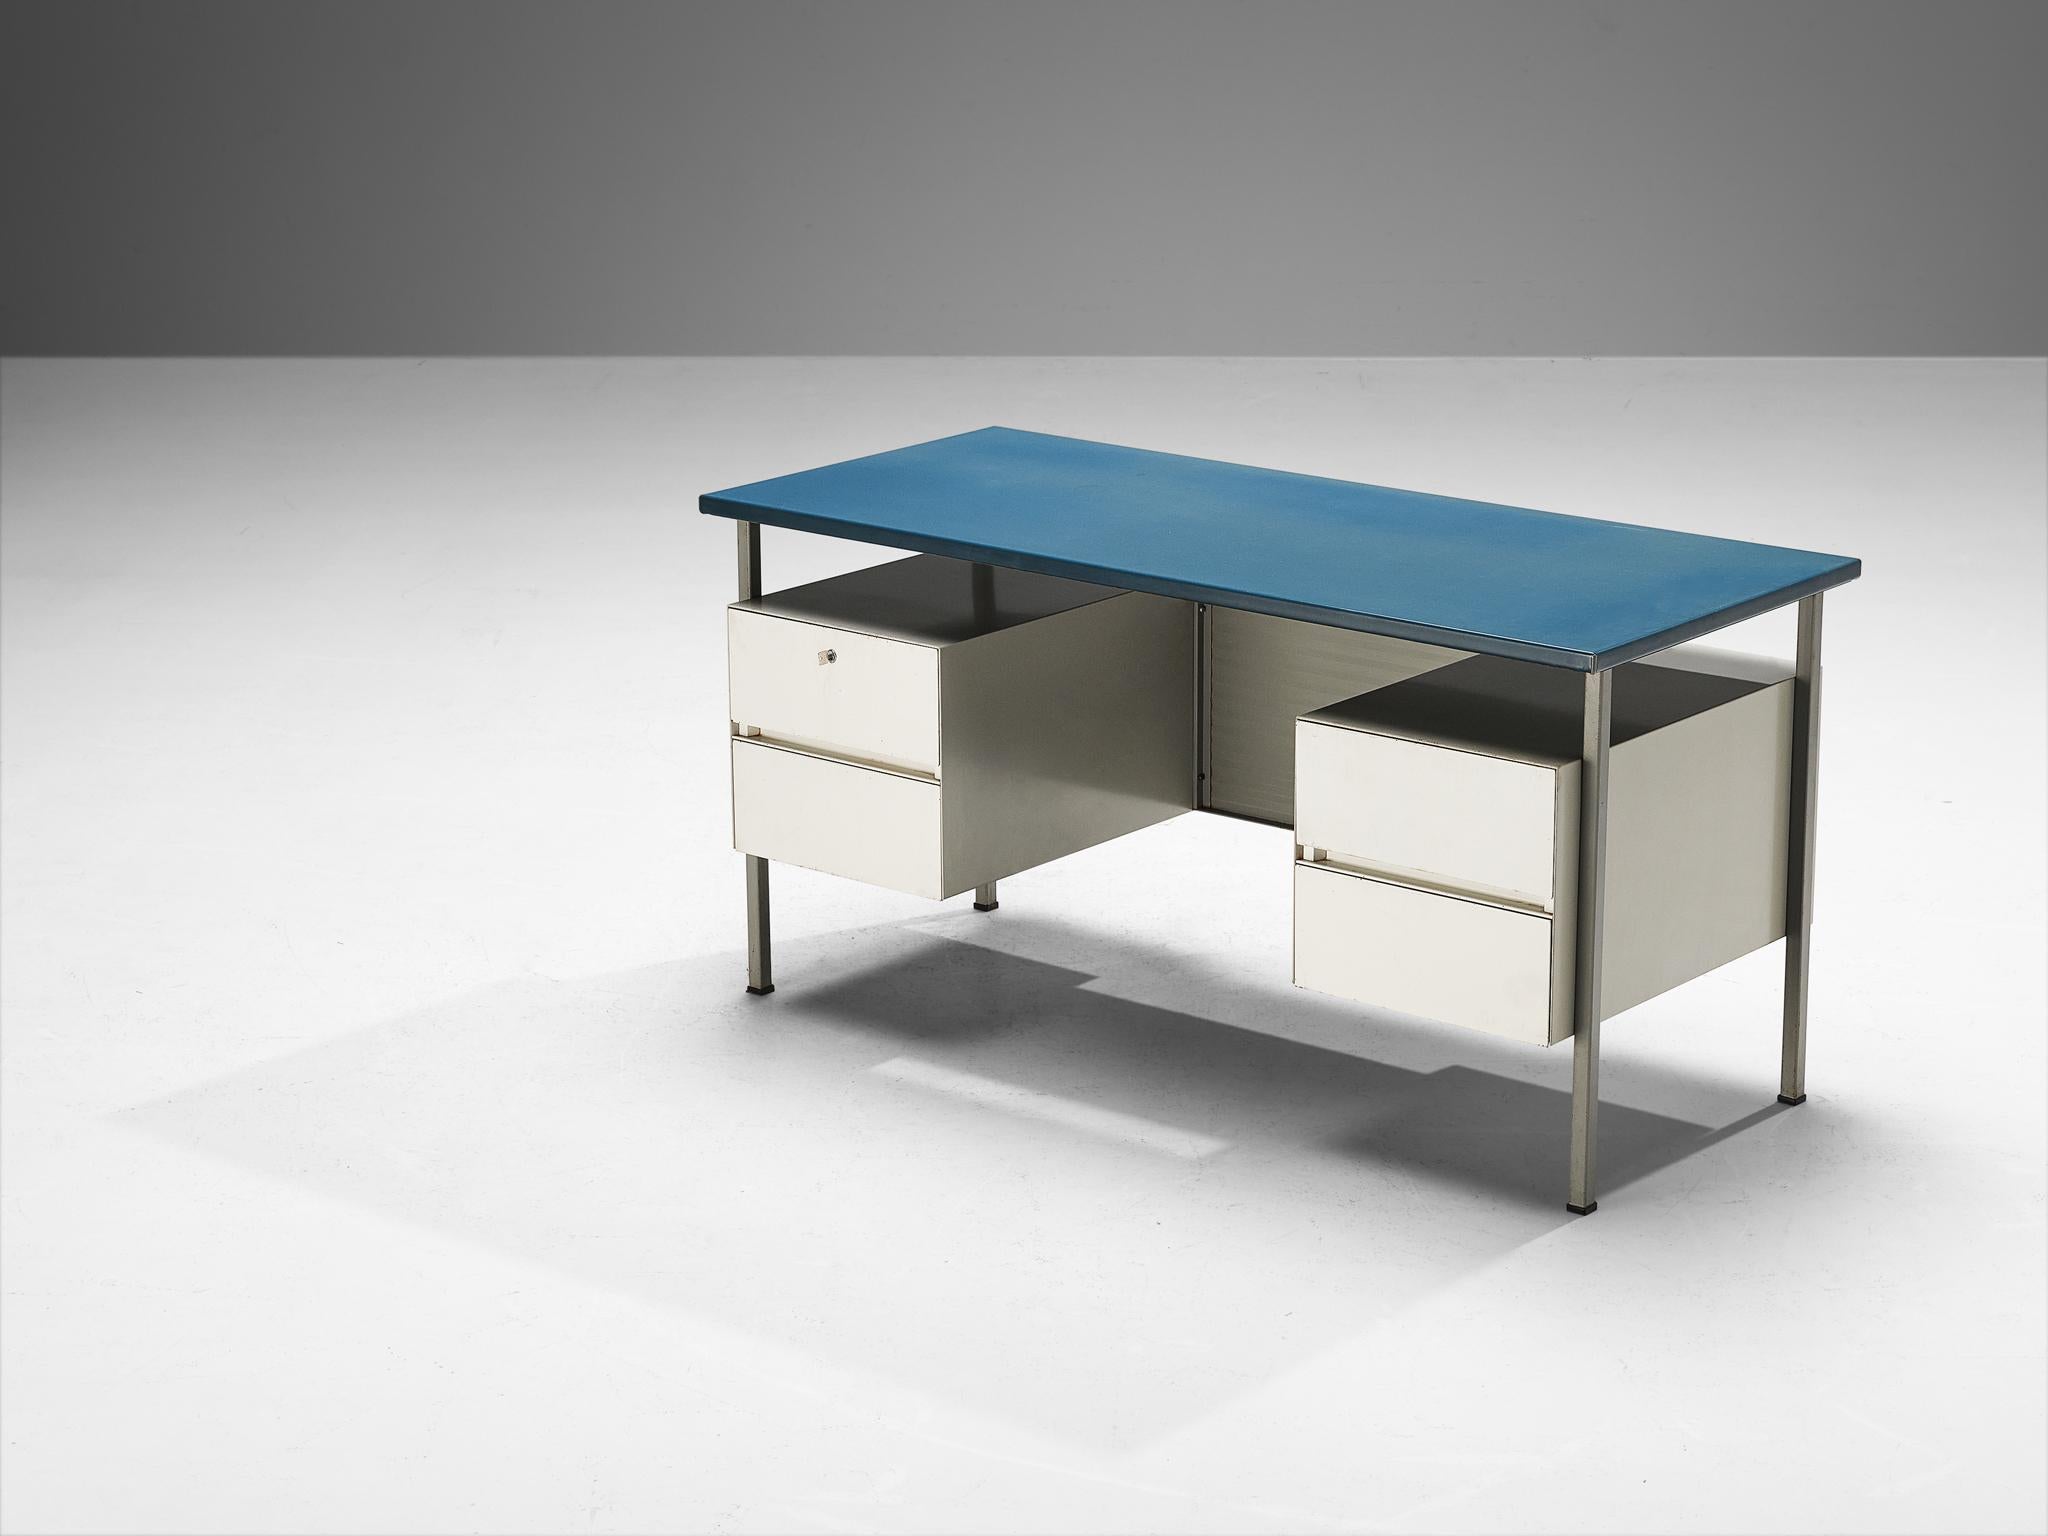 André Cordemeyer for Gispen, writing desk, model '3807', lacquered steel, vinyl, The Netherlands, 1962/1969

Dutch designer André Cordemeyer (1924-1998), known for his contributions to Gispen, conceived this writing desk model 3807. It was in